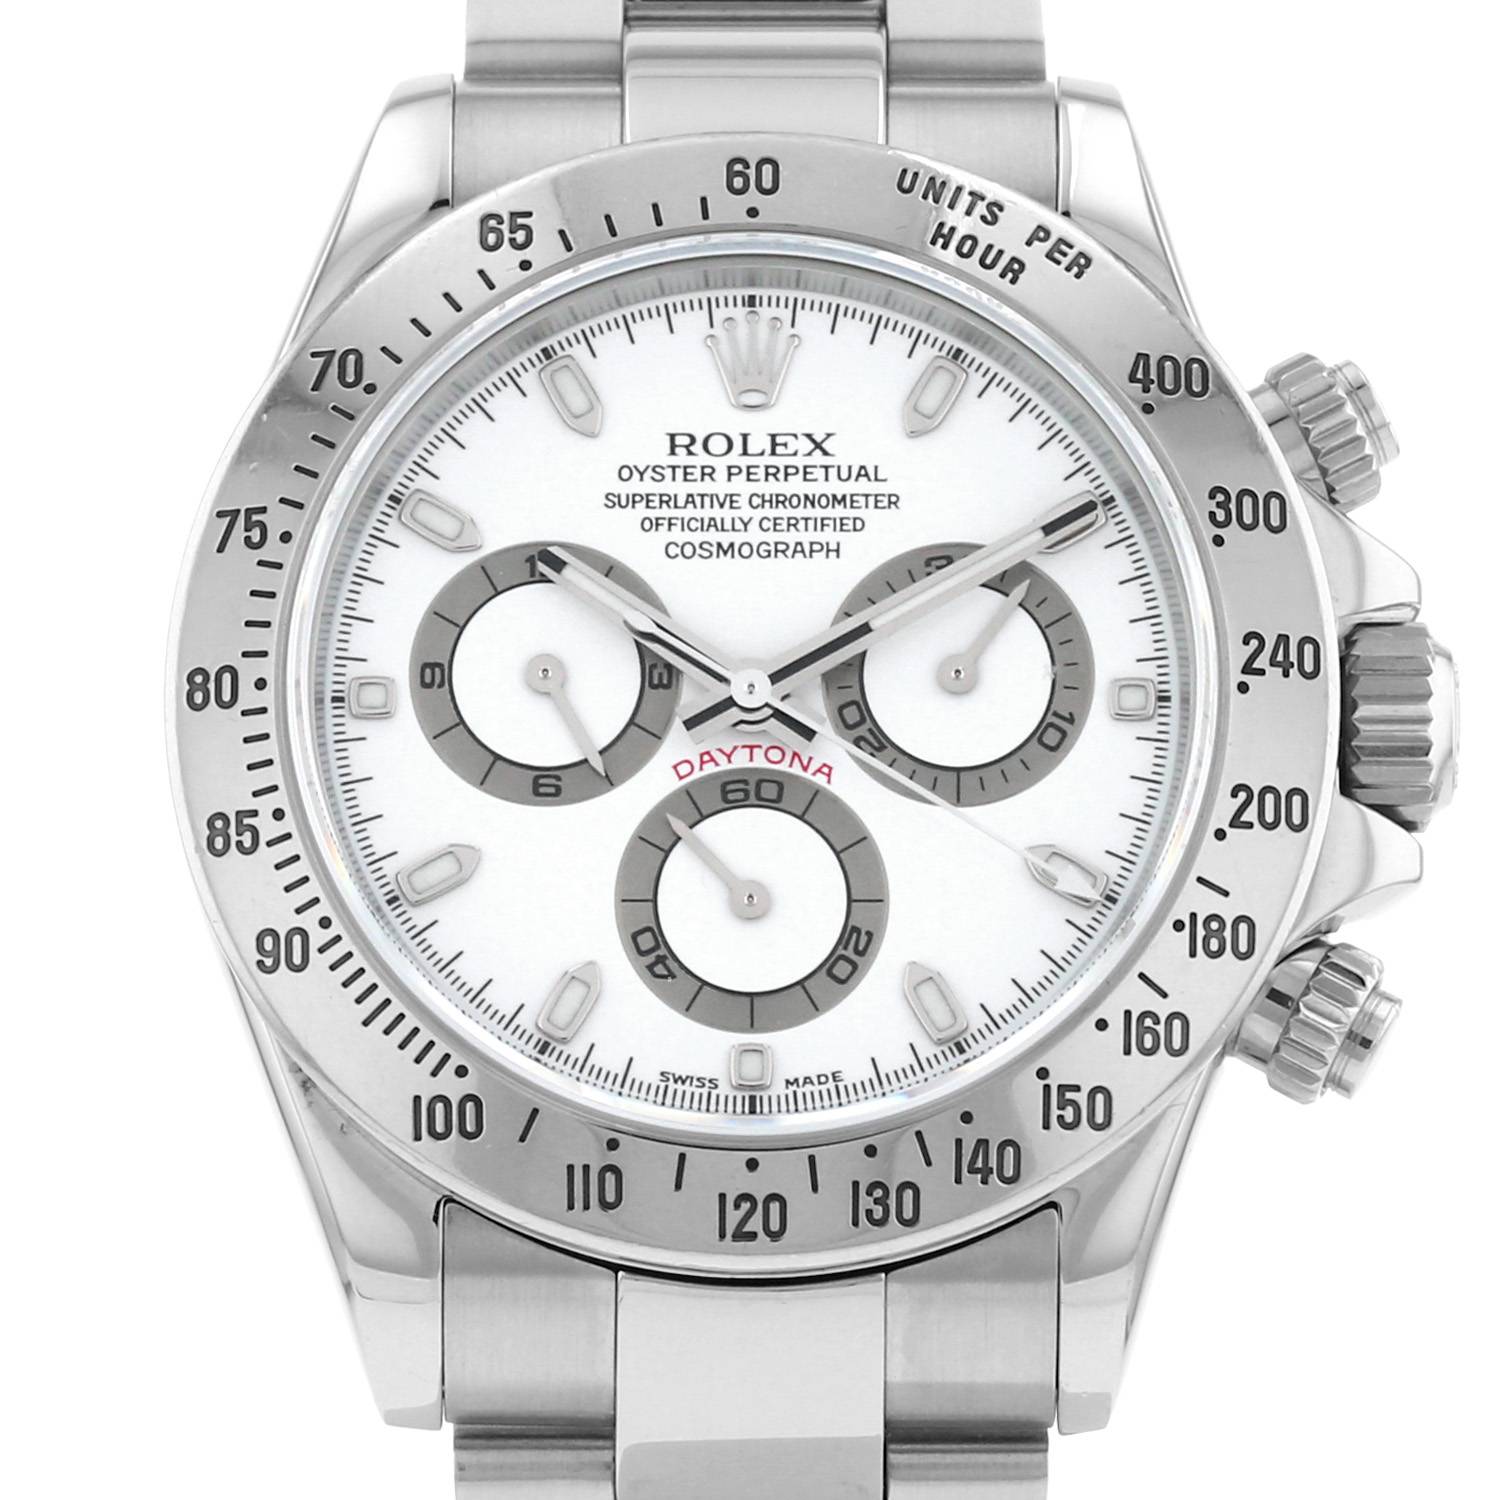 Automatique In Stainless Steel Ref: 116520